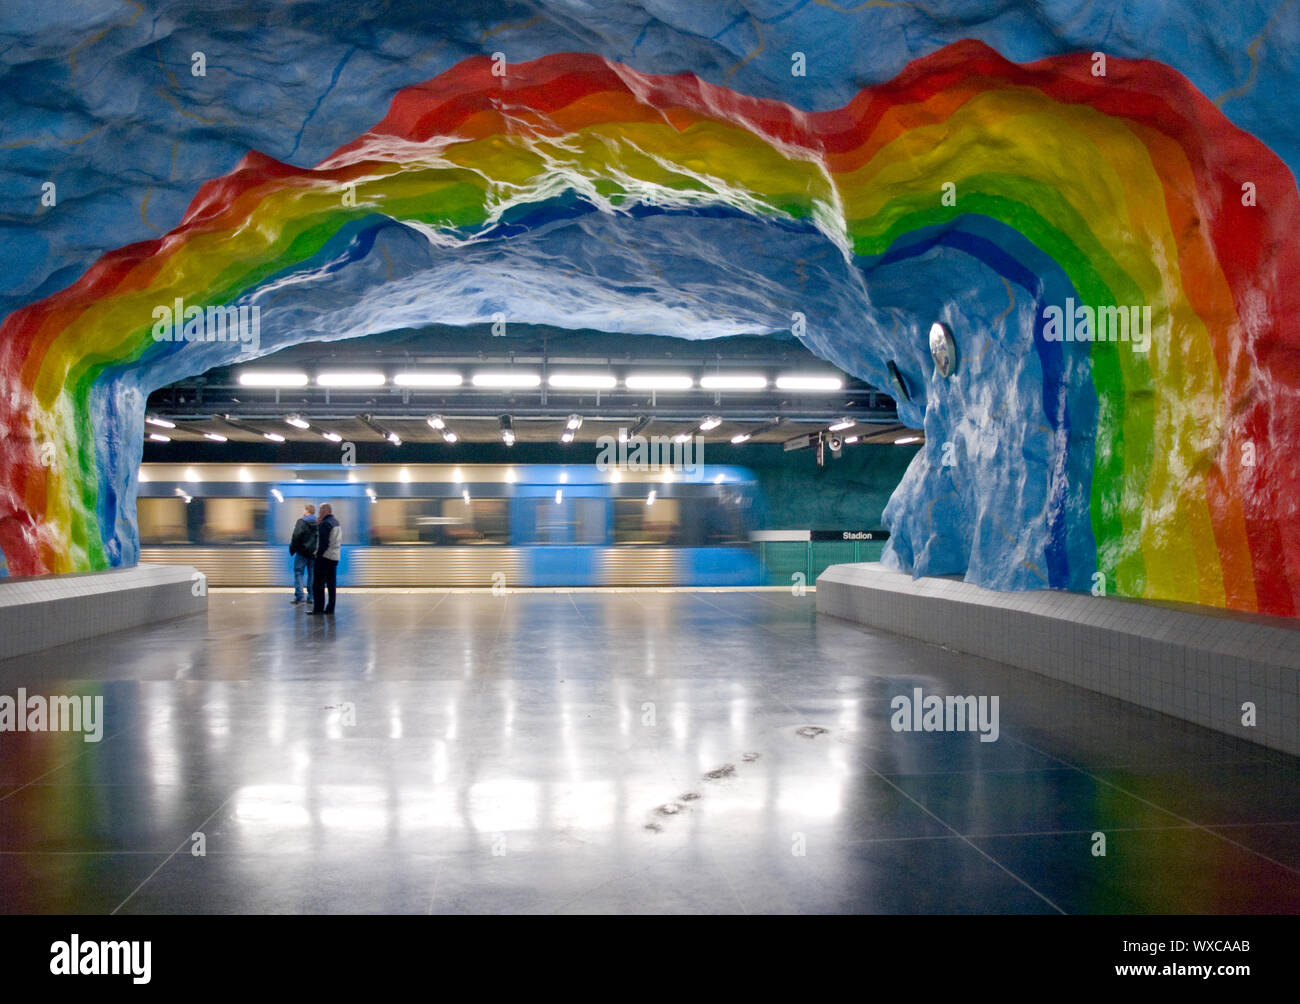 The rainbow art of Stadion Station on the Stockholm metro (Stockholm tunnelbana) system.  Stockholm, Sweden. Stock Photo